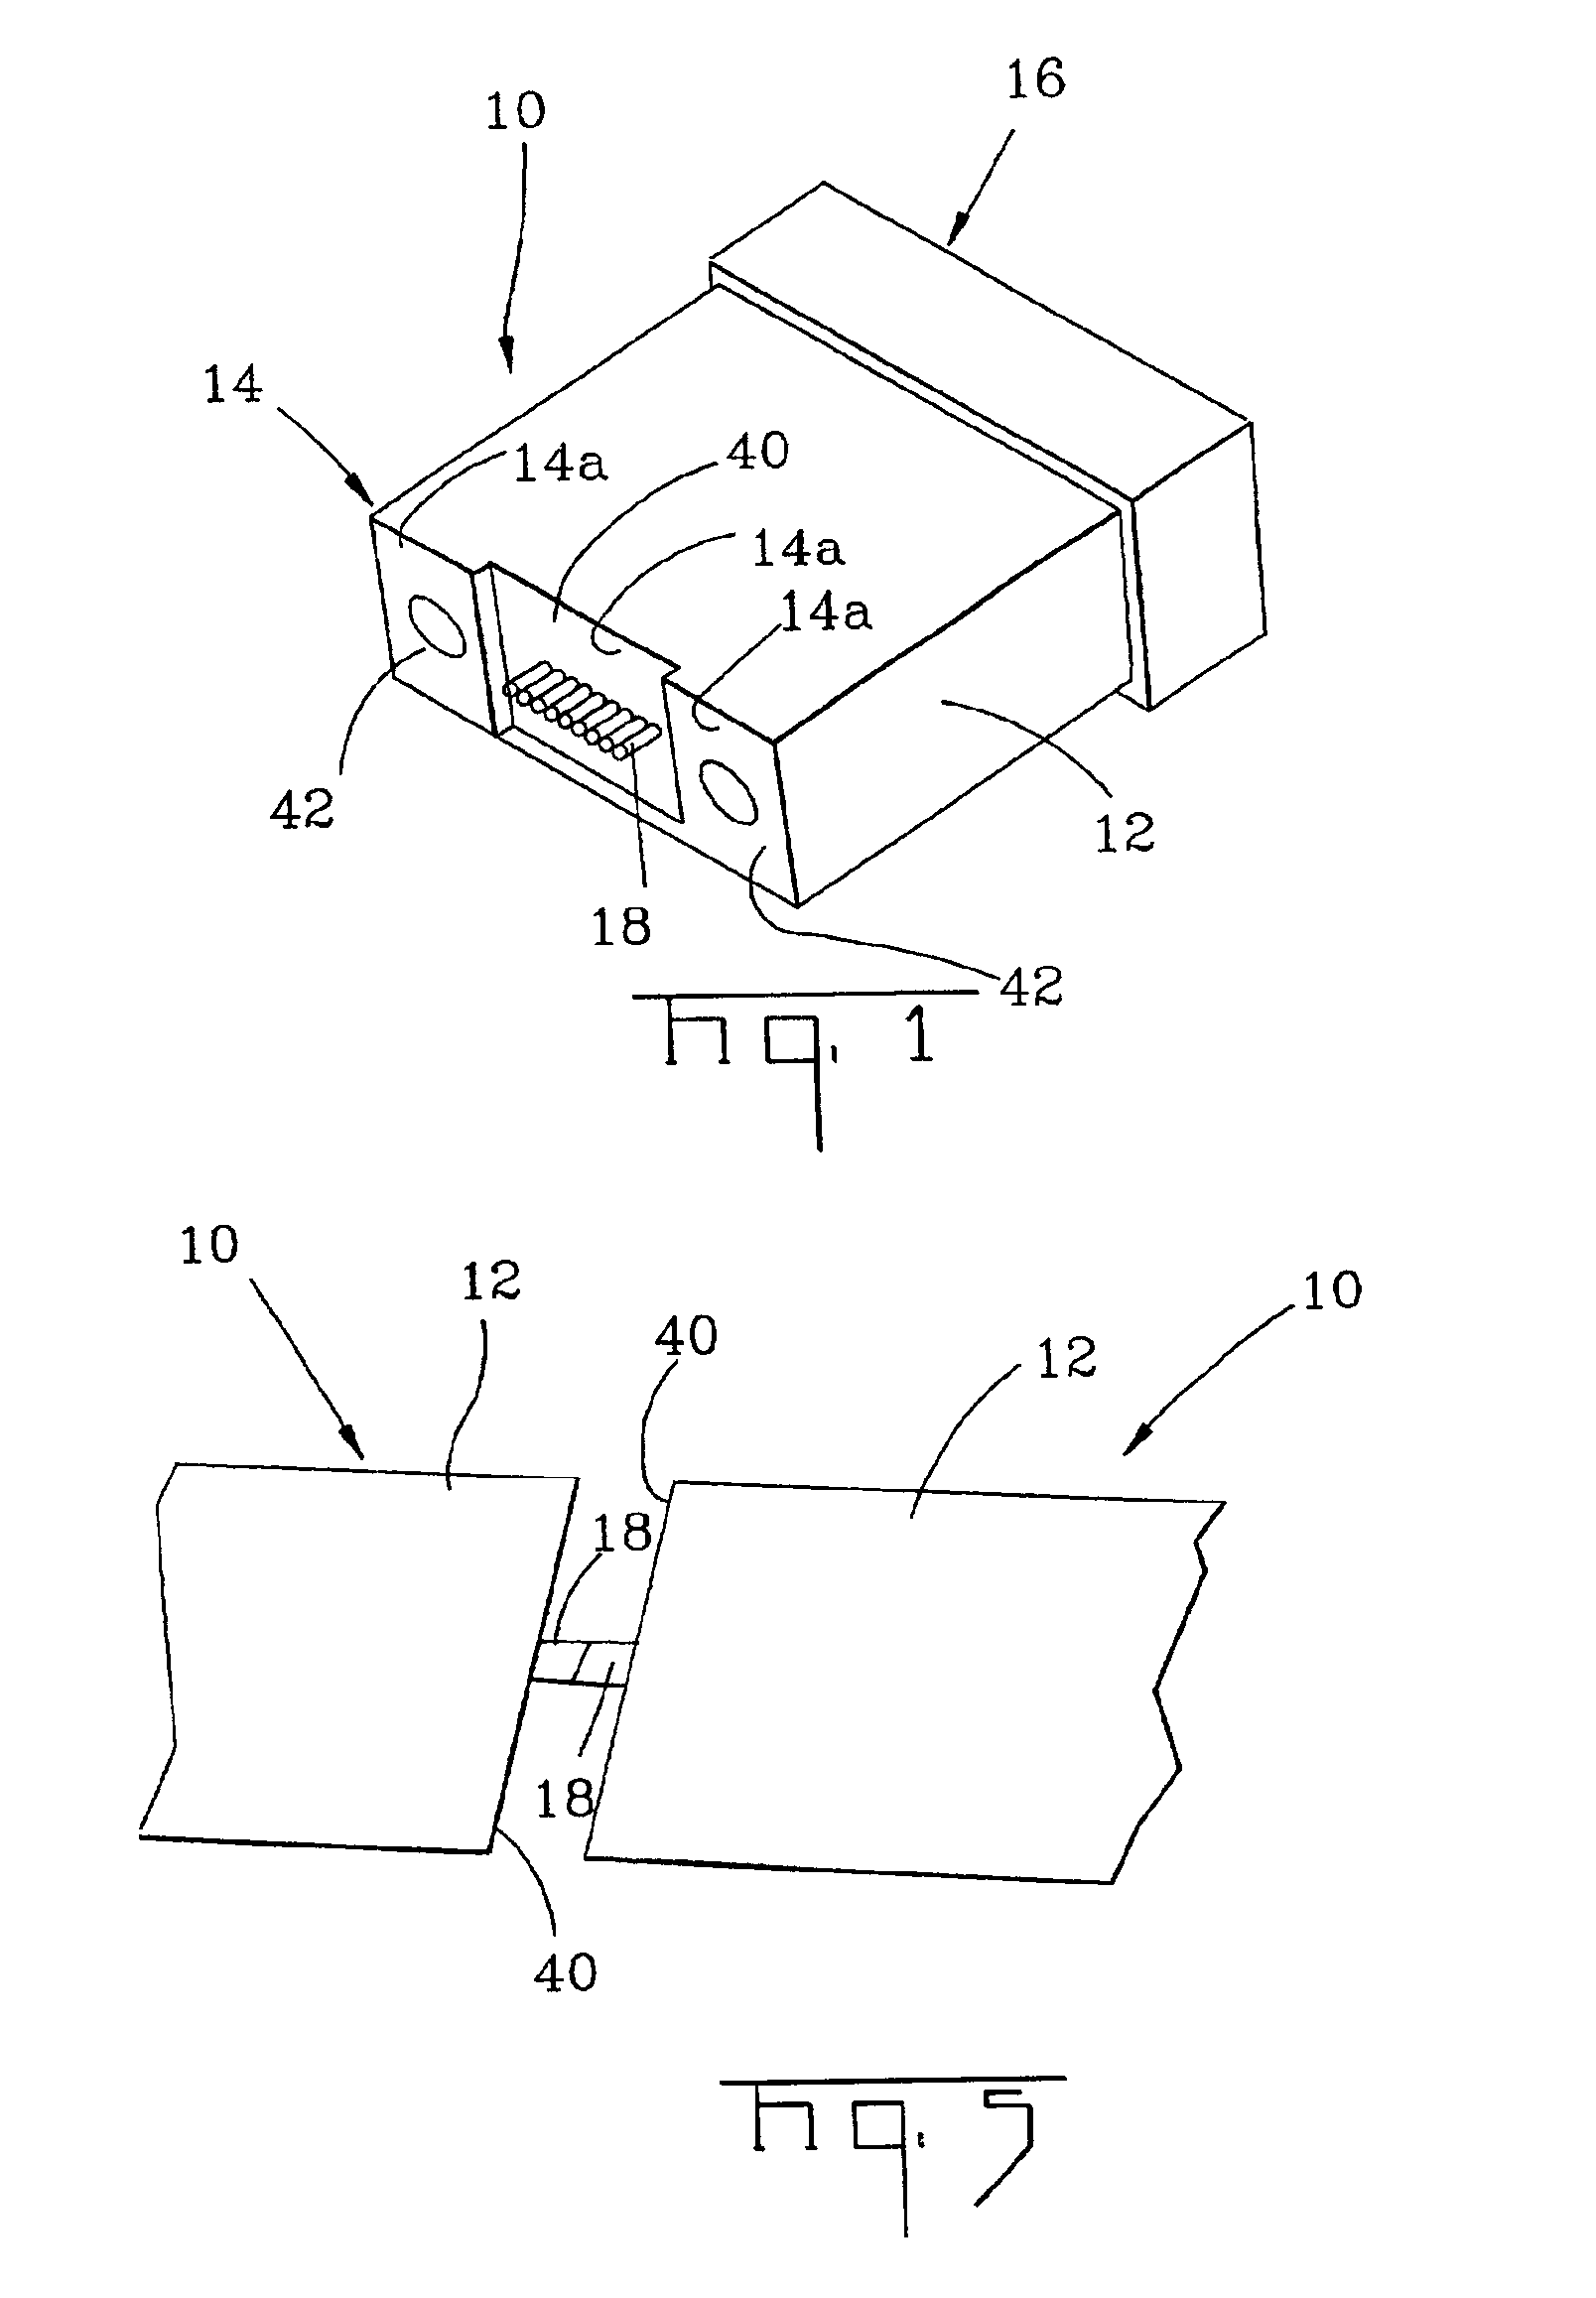 Ferrule assembly having highly protruding optical fibers and an associated fabrication method